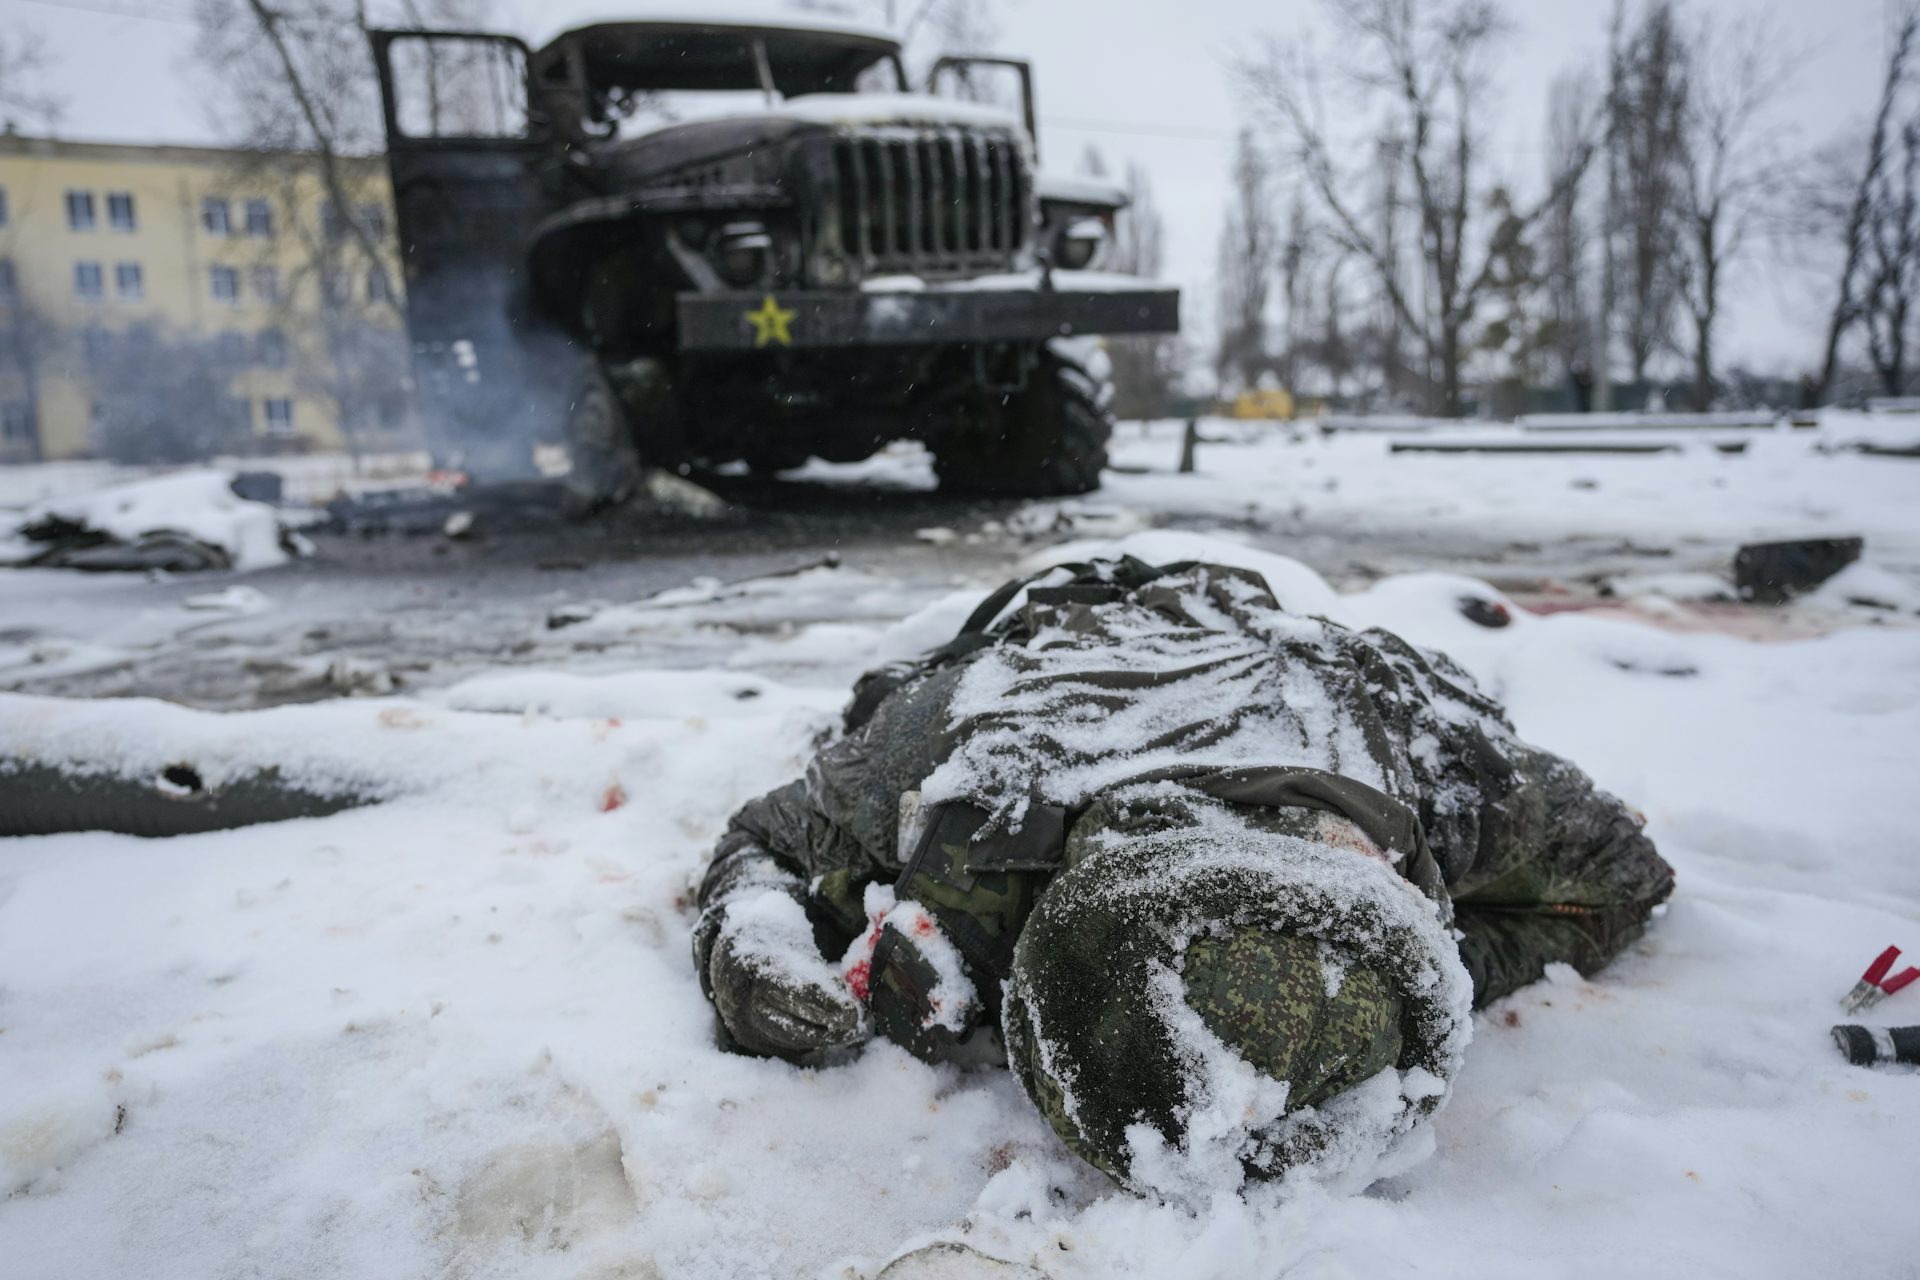 Social Media Provides Flood of Images of Death and Carnage from Ukraine War – and Contributes to Weaker Journalism Standards